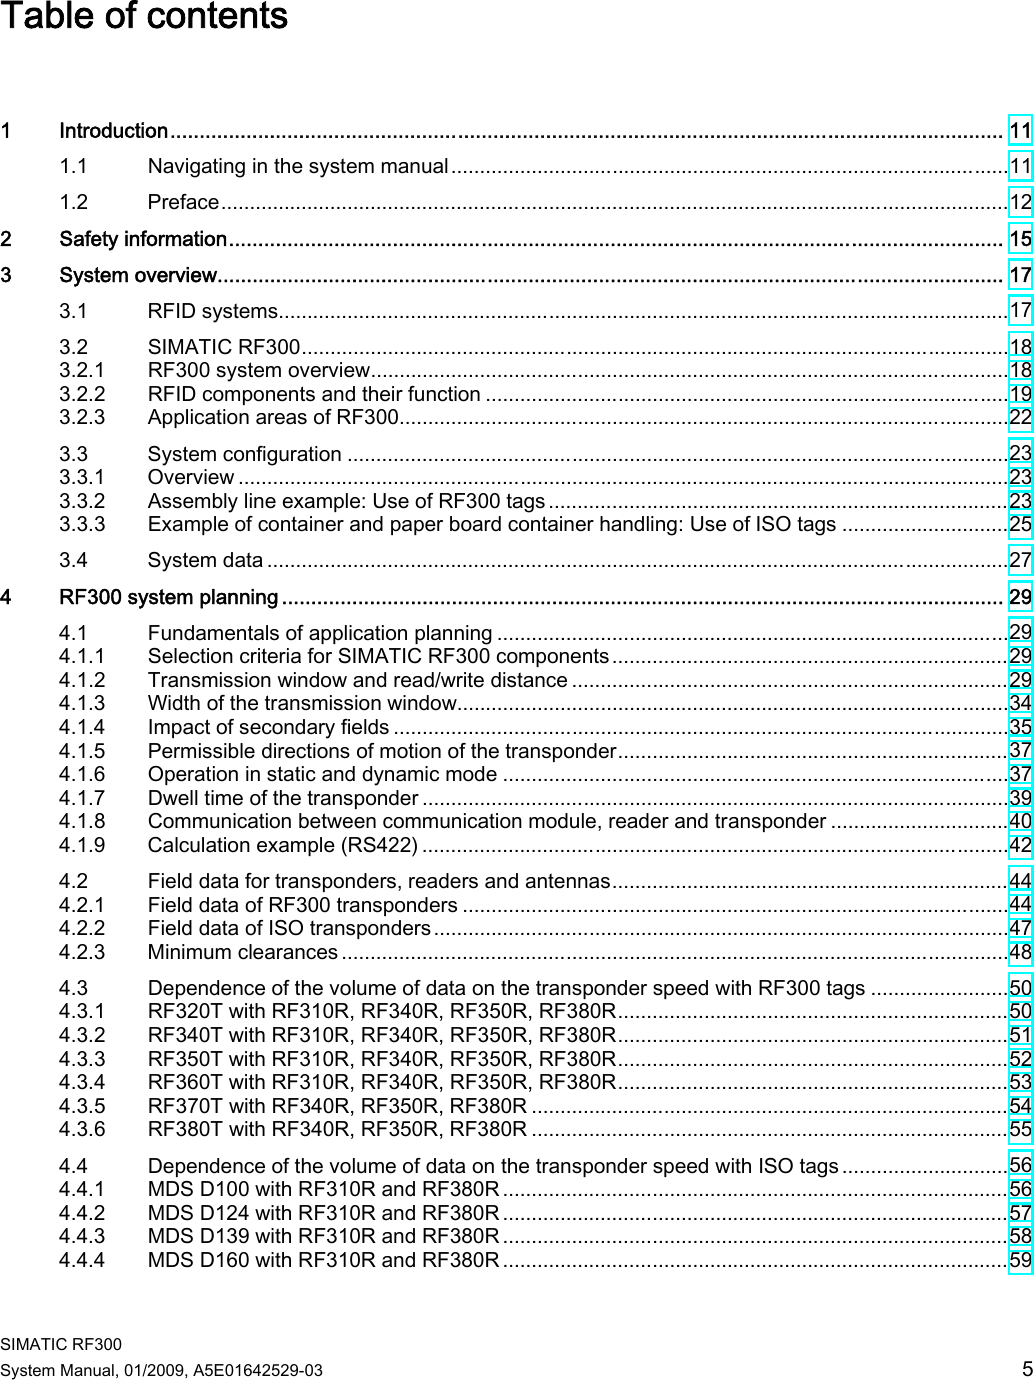  SIMATIC RF300 System Manual, 01/2009, A5E01642529-03  5 Table of contents  1  Introduction.............................................................................................................................................. 11 1.1  Navigating in the system manual.................................................................................................11 1.2  Preface.........................................................................................................................................12 2  Safety information.................................................................................................................................... 15 3  System overview...................................................................................................................................... 17 3.1  RFID systems...............................................................................................................................17 3.2  SIMATIC RF300...........................................................................................................................18 3.2.1  RF300 system overview...............................................................................................................18 3.2.2  RFID components and their function ...........................................................................................19 3.2.3  Application areas of RF300..........................................................................................................22 3.3  System configuration ...................................................................................................................23 3.3.1  Overview ......................................................................................................................................23 3.3.2  Assembly line example: Use of RF300 tags................................................................................23 3.3.3  Example of container and paper board container handling: Use of ISO tags .............................25 3.4  System data .................................................................................................................................27 4  RF300 system planning ........................................................................................................................... 29 4.1  Fundamentals of application planning .........................................................................................29 4.1.1  Selection criteria for SIMATIC RF300 components.....................................................................29 4.1.2  Transmission window and read/write distance ............................................................................29 4.1.3  Width of the transmission window................................................................................................34 4.1.4  Impact of secondary fields ...........................................................................................................35 4.1.5  Permissible directions of motion of the transponder....................................................................37 4.1.6  Operation in static and dynamic mode ........................................................................................37 4.1.7  Dwell time of the transponder ......................................................................................................39 4.1.8  Communication between communication module, reader and transponder ...............................40 4.1.9  Calculation example (RS422) ......................................................................................................42 4.2  Field data for transponders, readers and antennas.....................................................................44 4.2.1  Field data of RF300 transponders ...............................................................................................44 4.2.2  Field data of ISO transponders....................................................................................................47 4.2.3  Minimum clearances ....................................................................................................................48 4.3  Dependence of the volume of data on the transponder speed with RF300 tags ........................50 4.3.1  RF320T with RF310R, RF340R, RF350R, RF380R....................................................................50 4.3.2  RF340T with RF310R, RF340R, RF350R, RF380R....................................................................51 4.3.3  RF350T with RF310R, RF340R, RF350R, RF380R....................................................................52 4.3.4  RF360T with RF310R, RF340R, RF350R, RF380R....................................................................53 4.3.5  RF370T with RF340R, RF350R, RF380R ...................................................................................54 4.3.6  RF380T with RF340R, RF350R, RF380R ...................................................................................55 4.4  Dependence of the volume of data on the transponder speed with ISO tags .............................56 4.4.1  MDS D100 with RF310R and RF380R ........................................................................................56 4.4.2  MDS D124 with RF310R and RF380R ........................................................................................57 4.4.3  MDS D139 with RF310R and RF380R ........................................................................................58 4.4.4  MDS D160 with RF310R and RF380R ........................................................................................59 